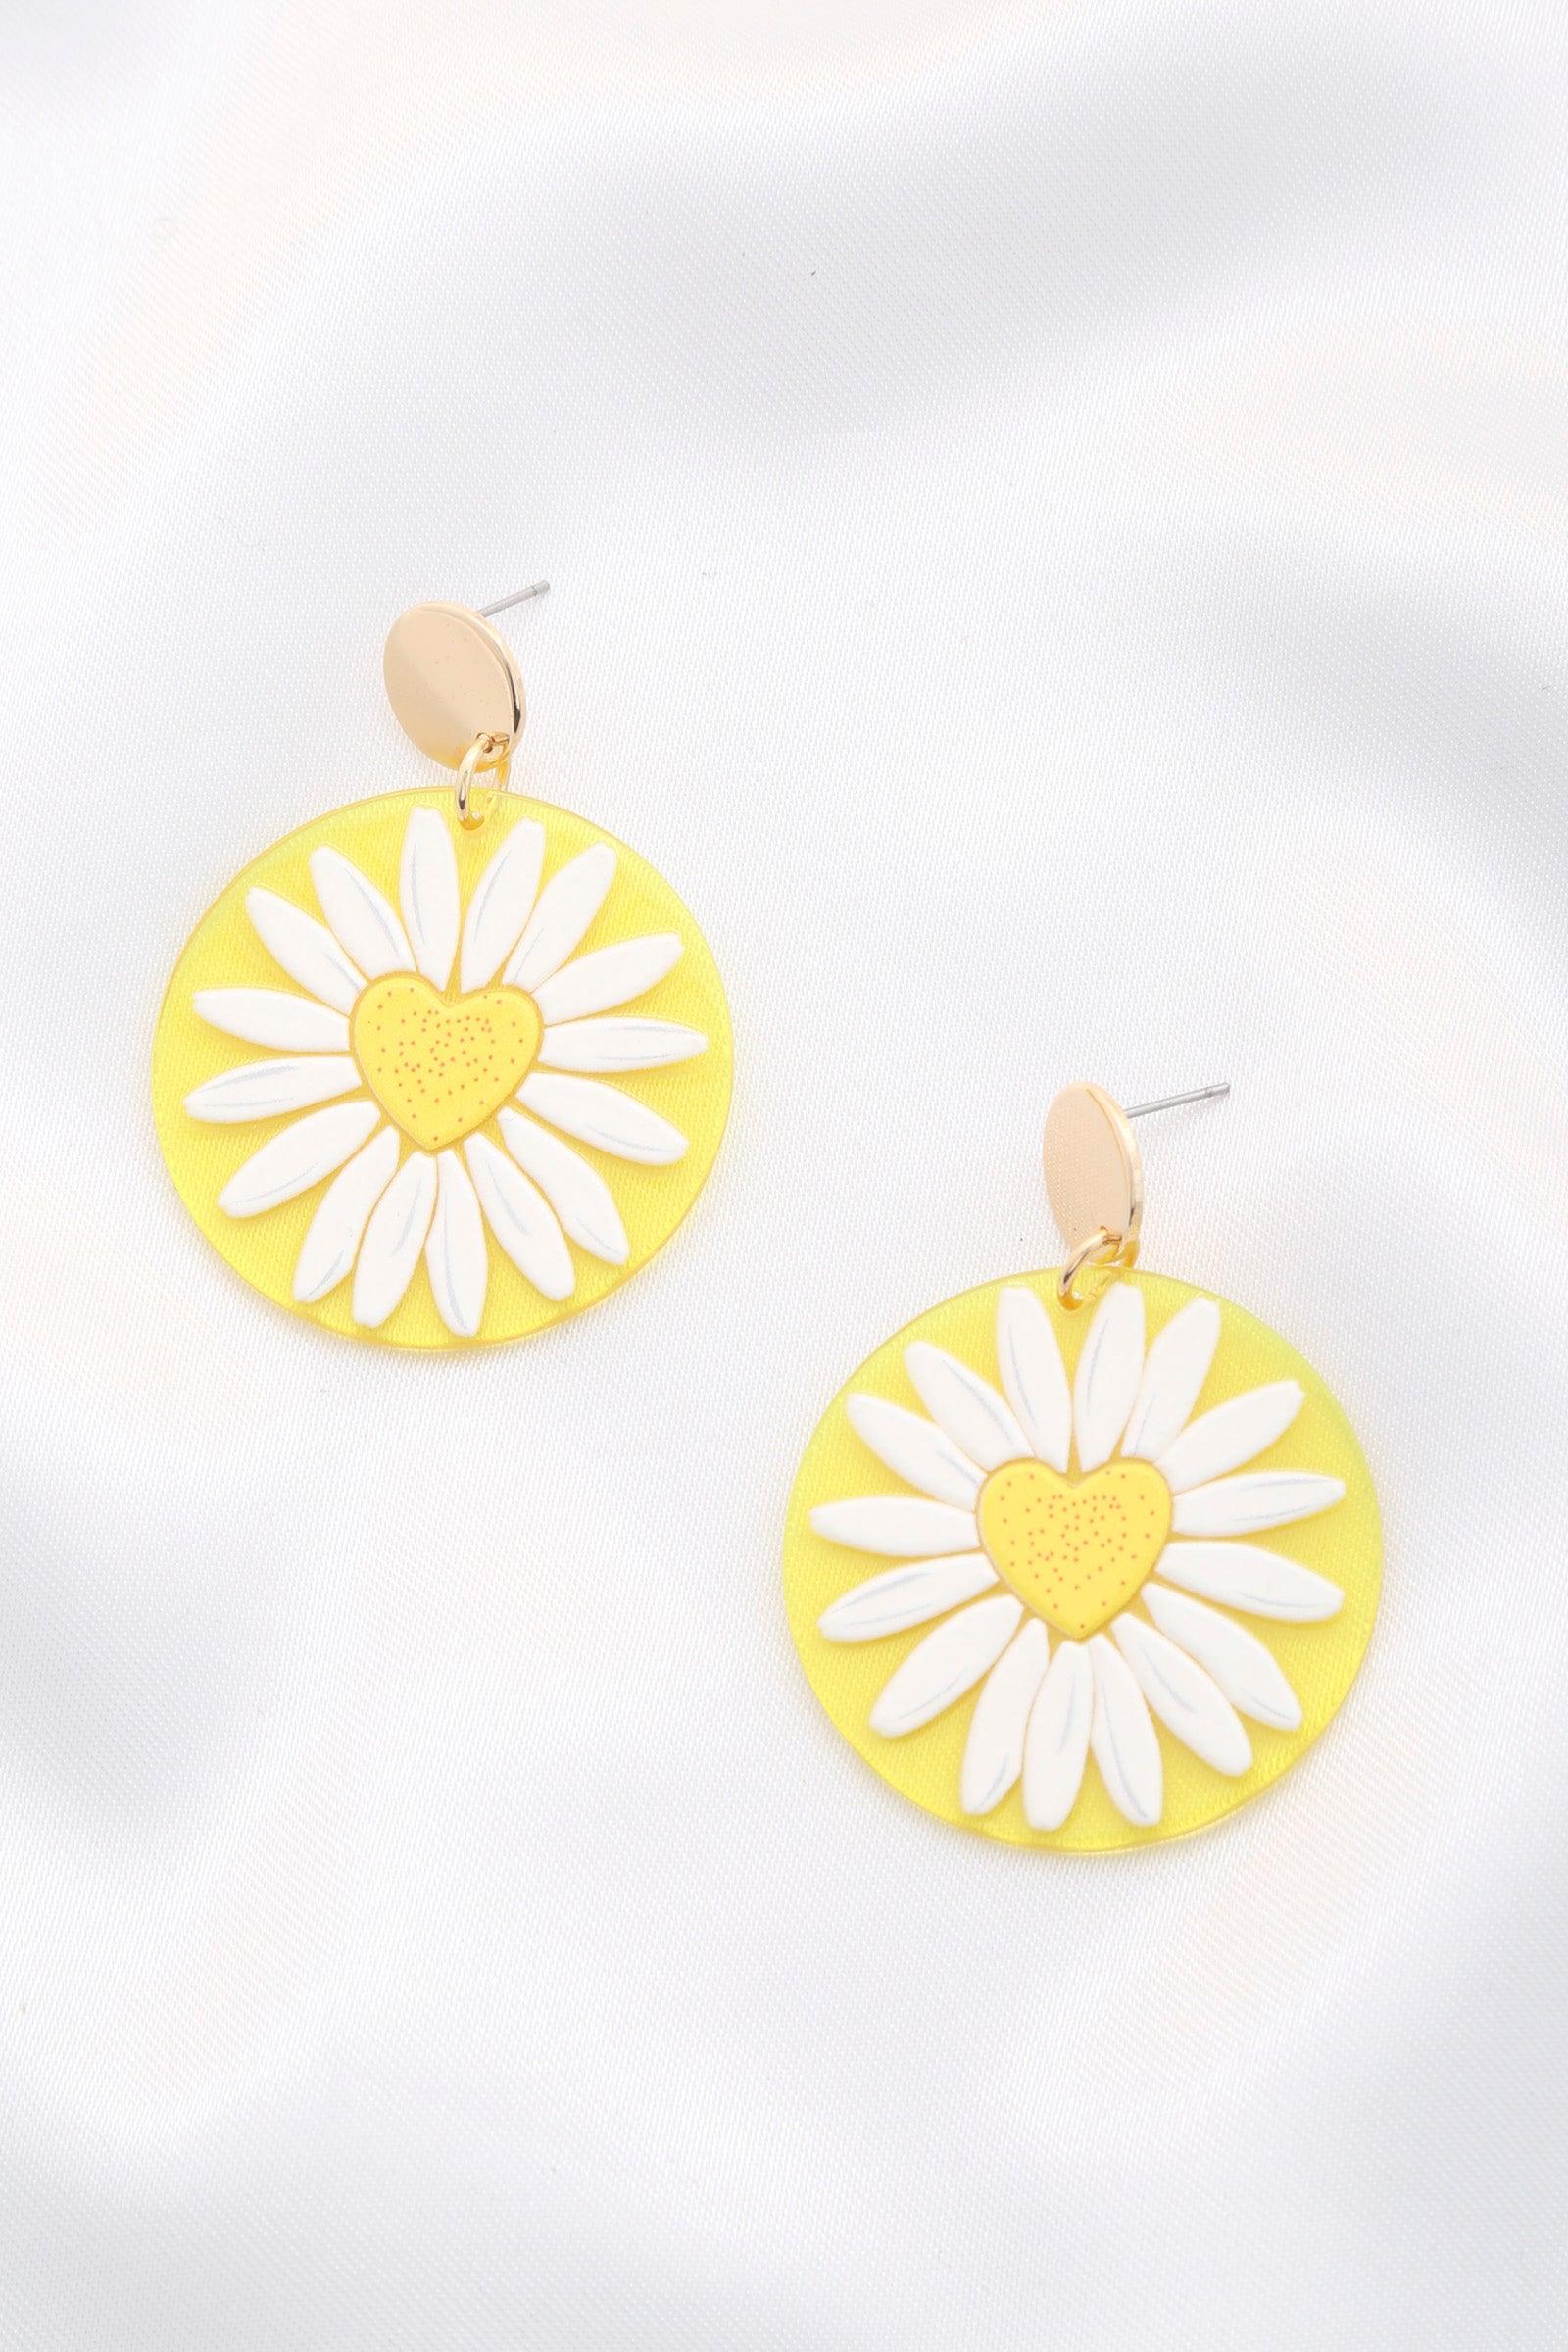 Daisy Printed Round Ac Drop Earriing Naughty Smile Fashion